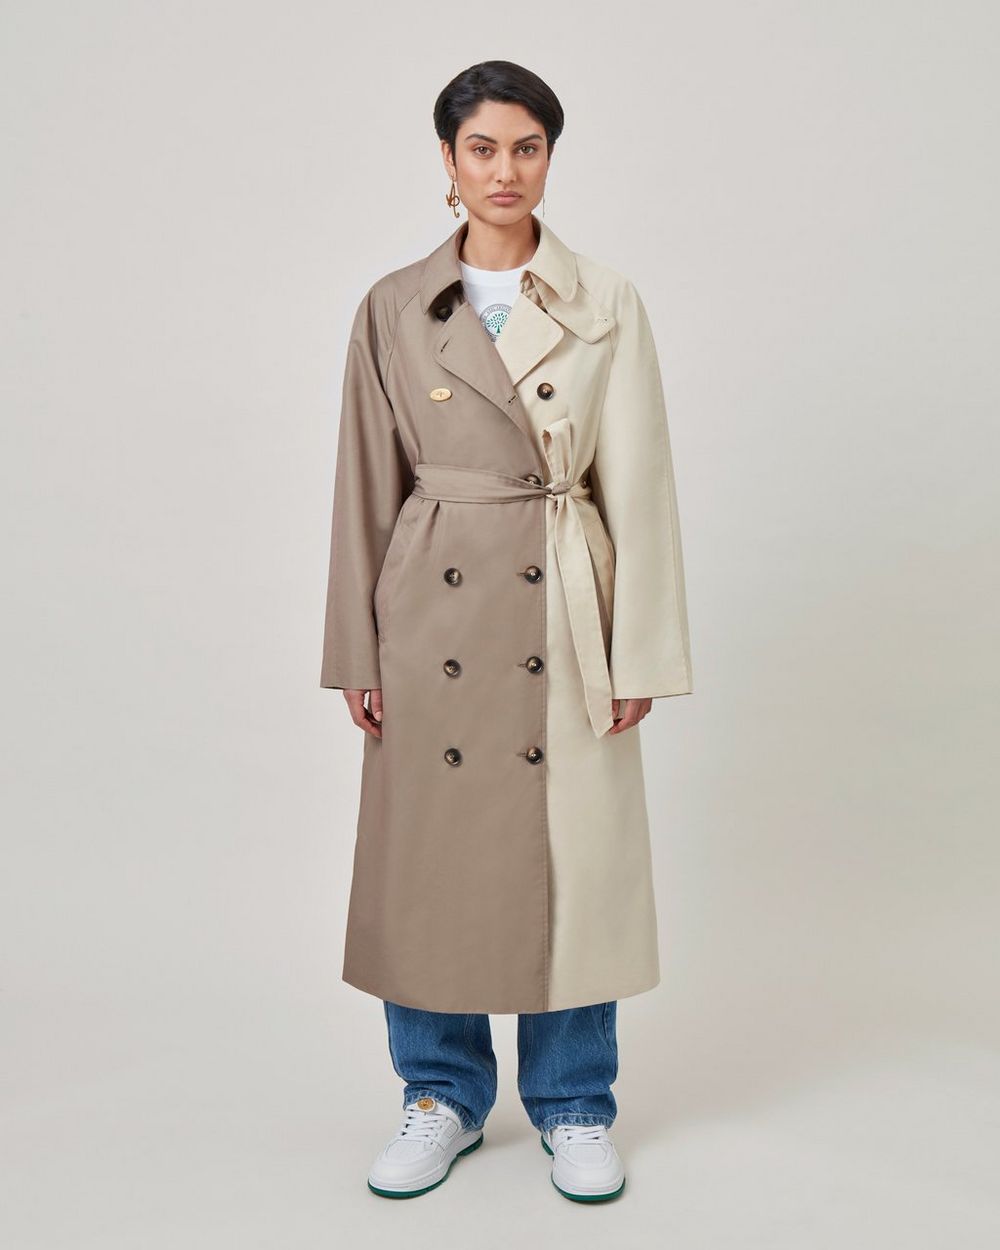 Axel Arigato for Mulberry Trench Coat | Multicolour Mixed Material ...